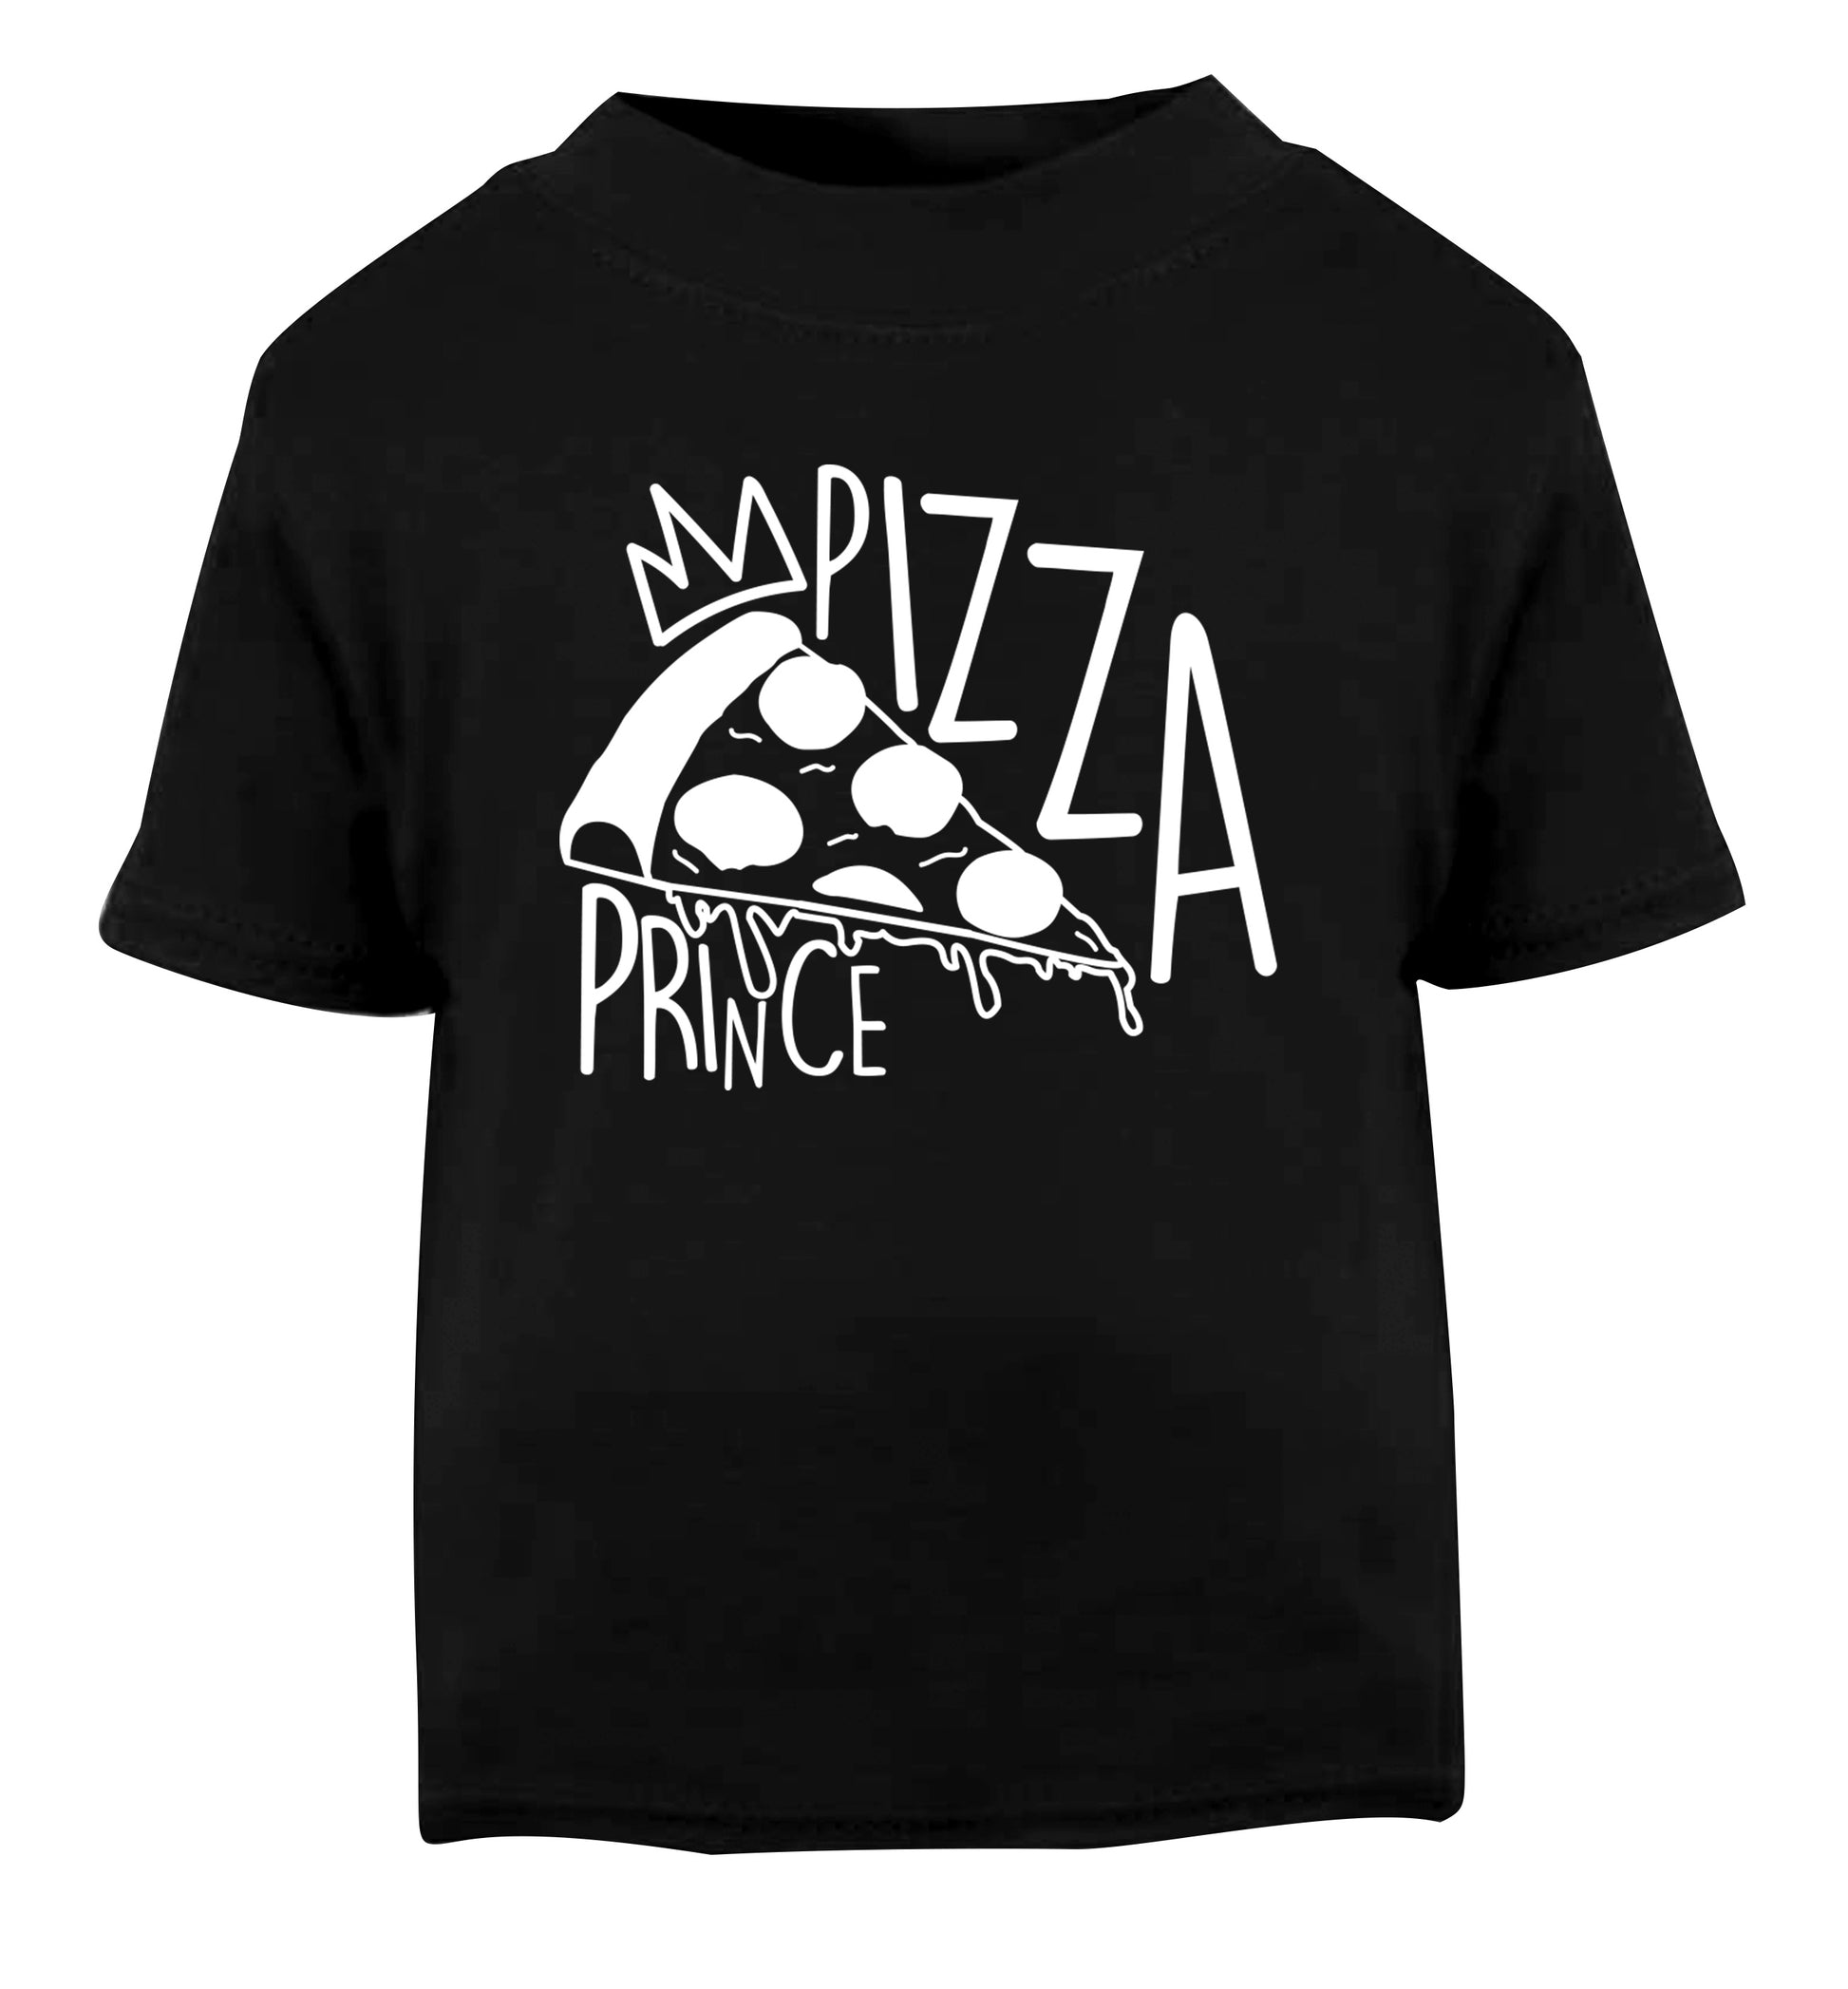 Pizza Prince Black Baby Toddler Tshirt 2 years